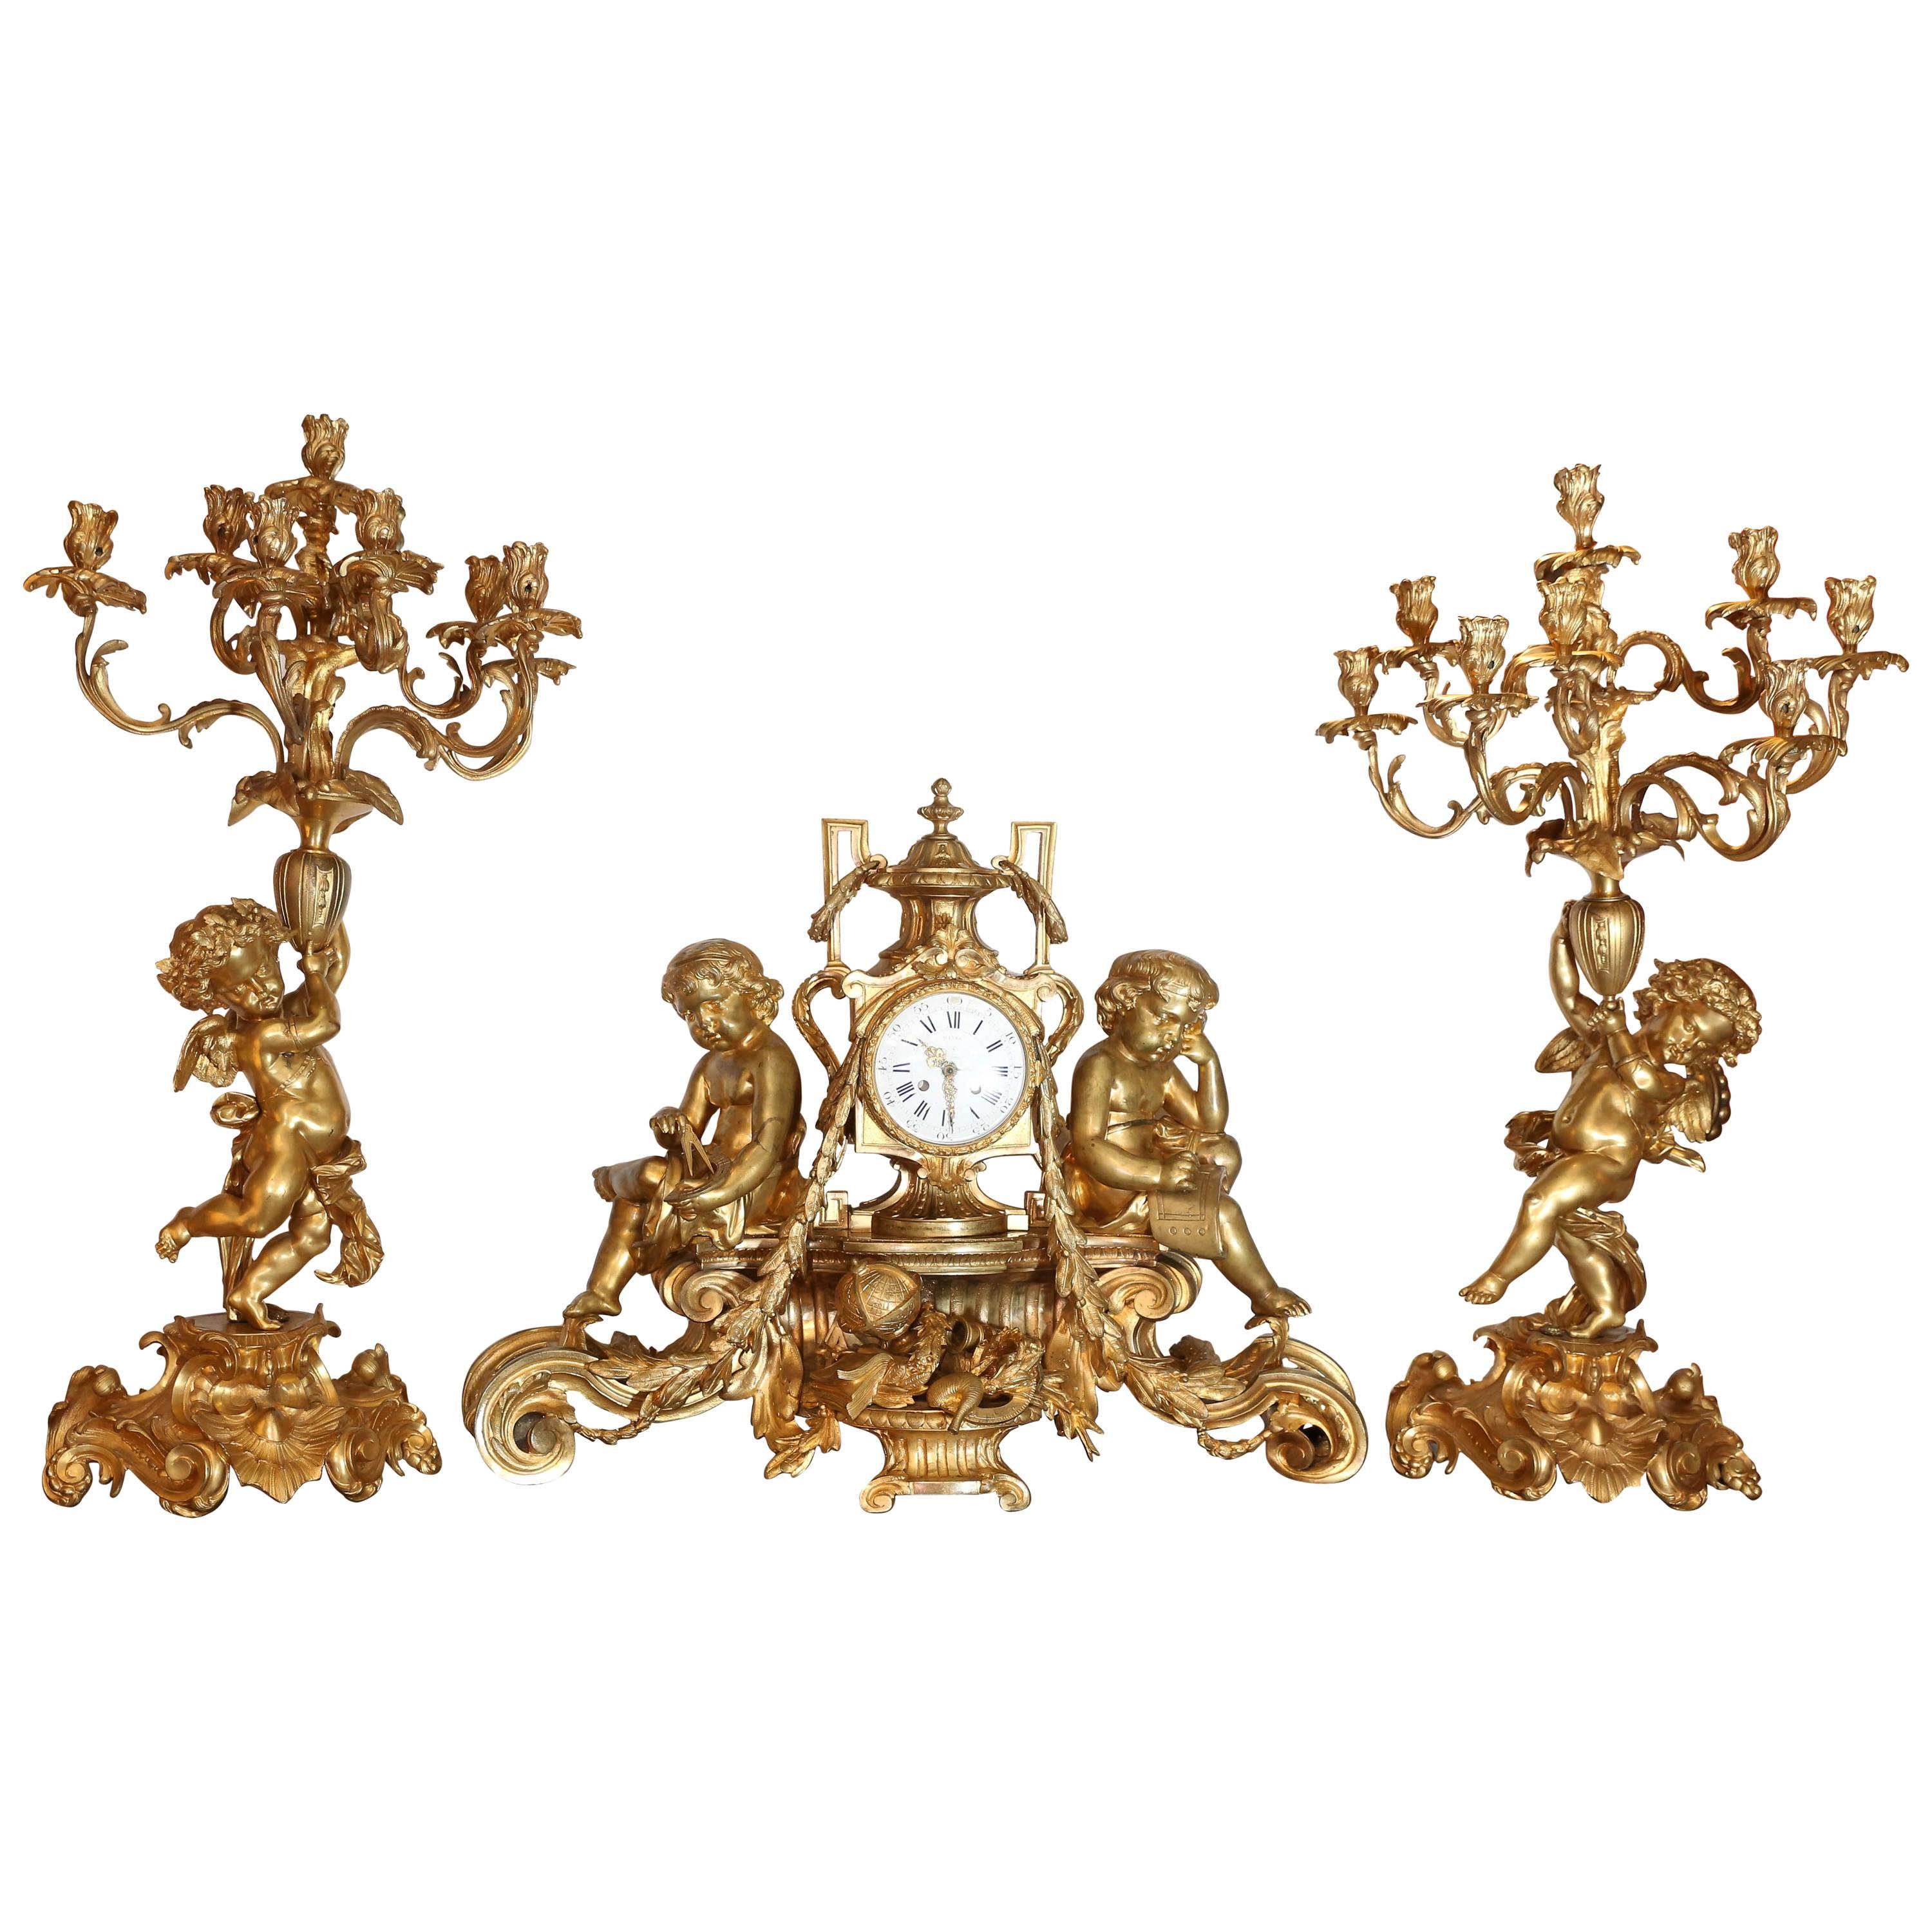 Three-Piece French Garniture Set, 19th Century Consists of Clock and Candelabrum